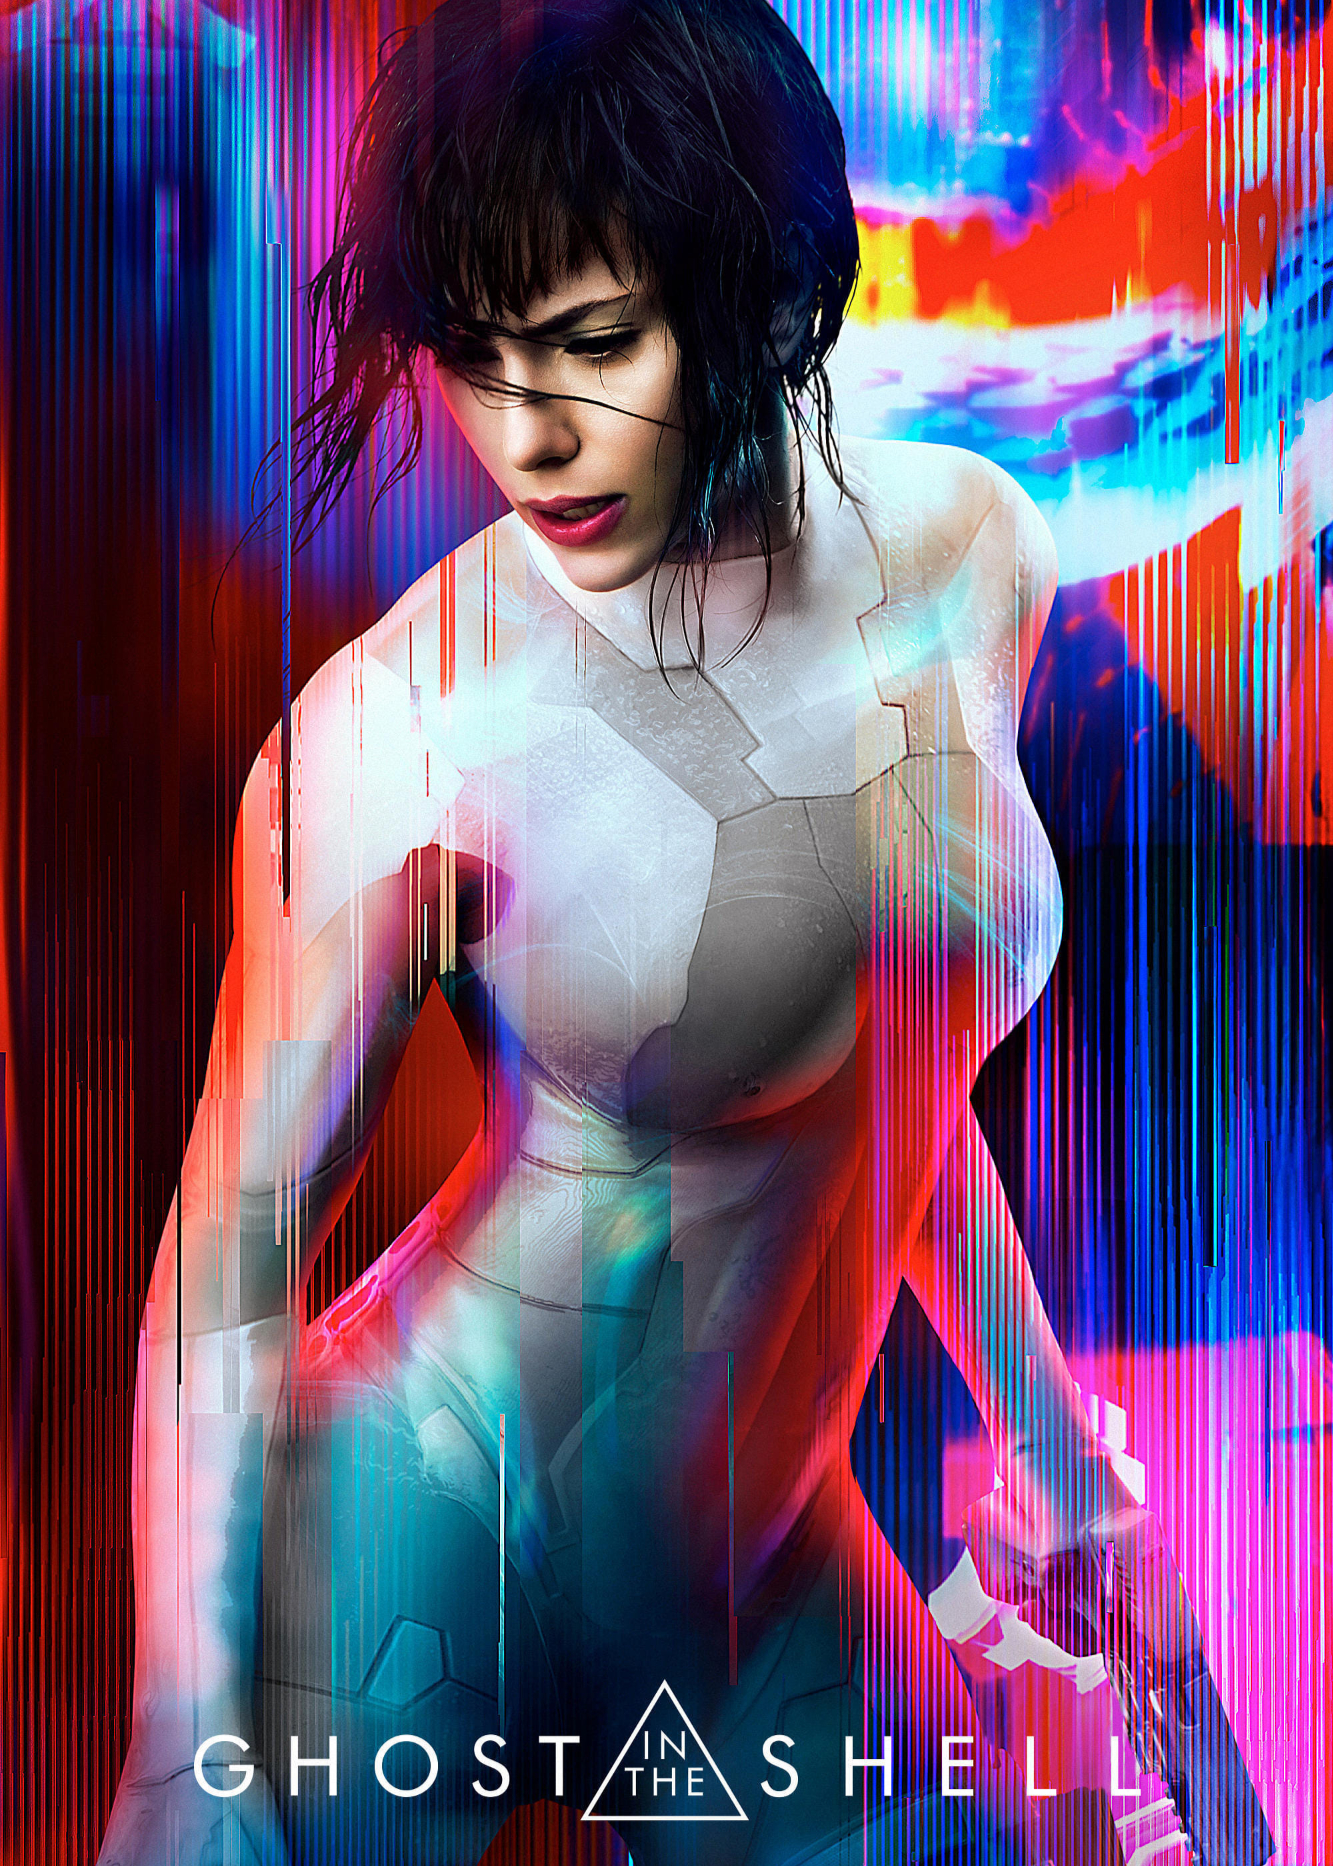 Poster Phim Vỏ Bọc Ma (Ghost in the Shell)